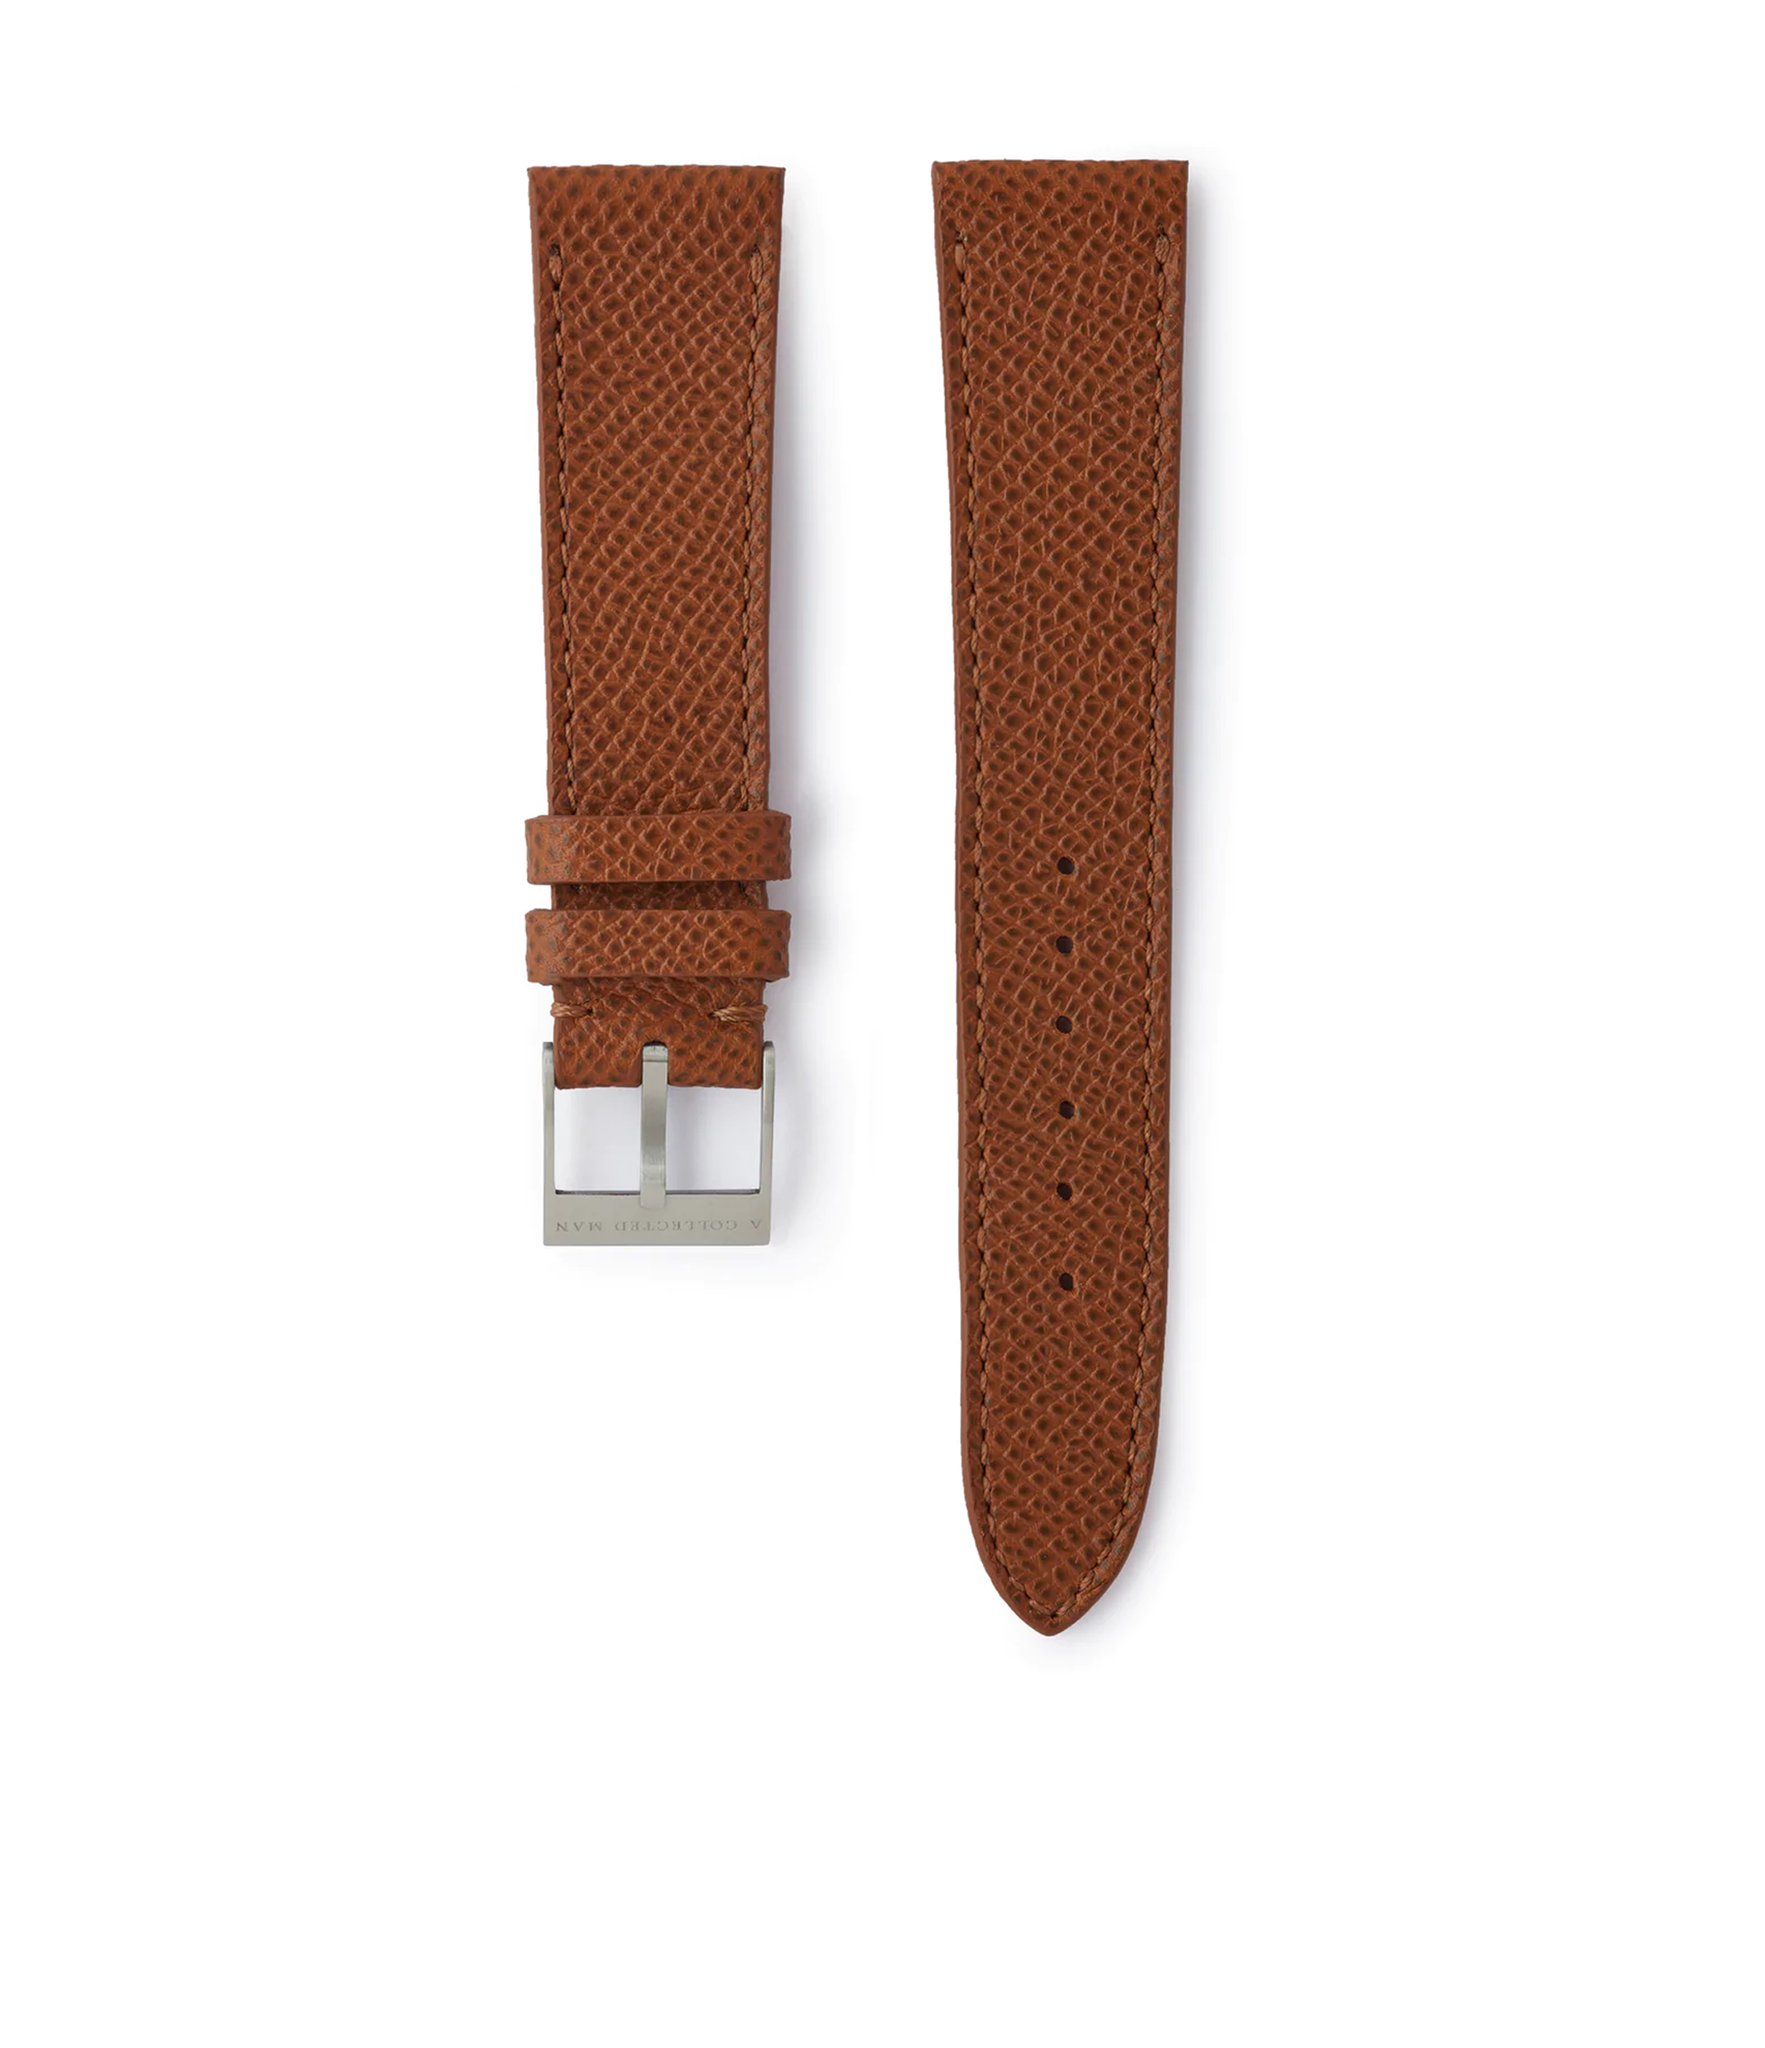 Buy saffiano quality watch strap in gilded amber brown from A Collected Man London, in short or regular lengths. We are proud to offer these hand-crafted watch straps, thoughtfully made in Europe, to suit your watch. Available to order online for worldwide delivery.